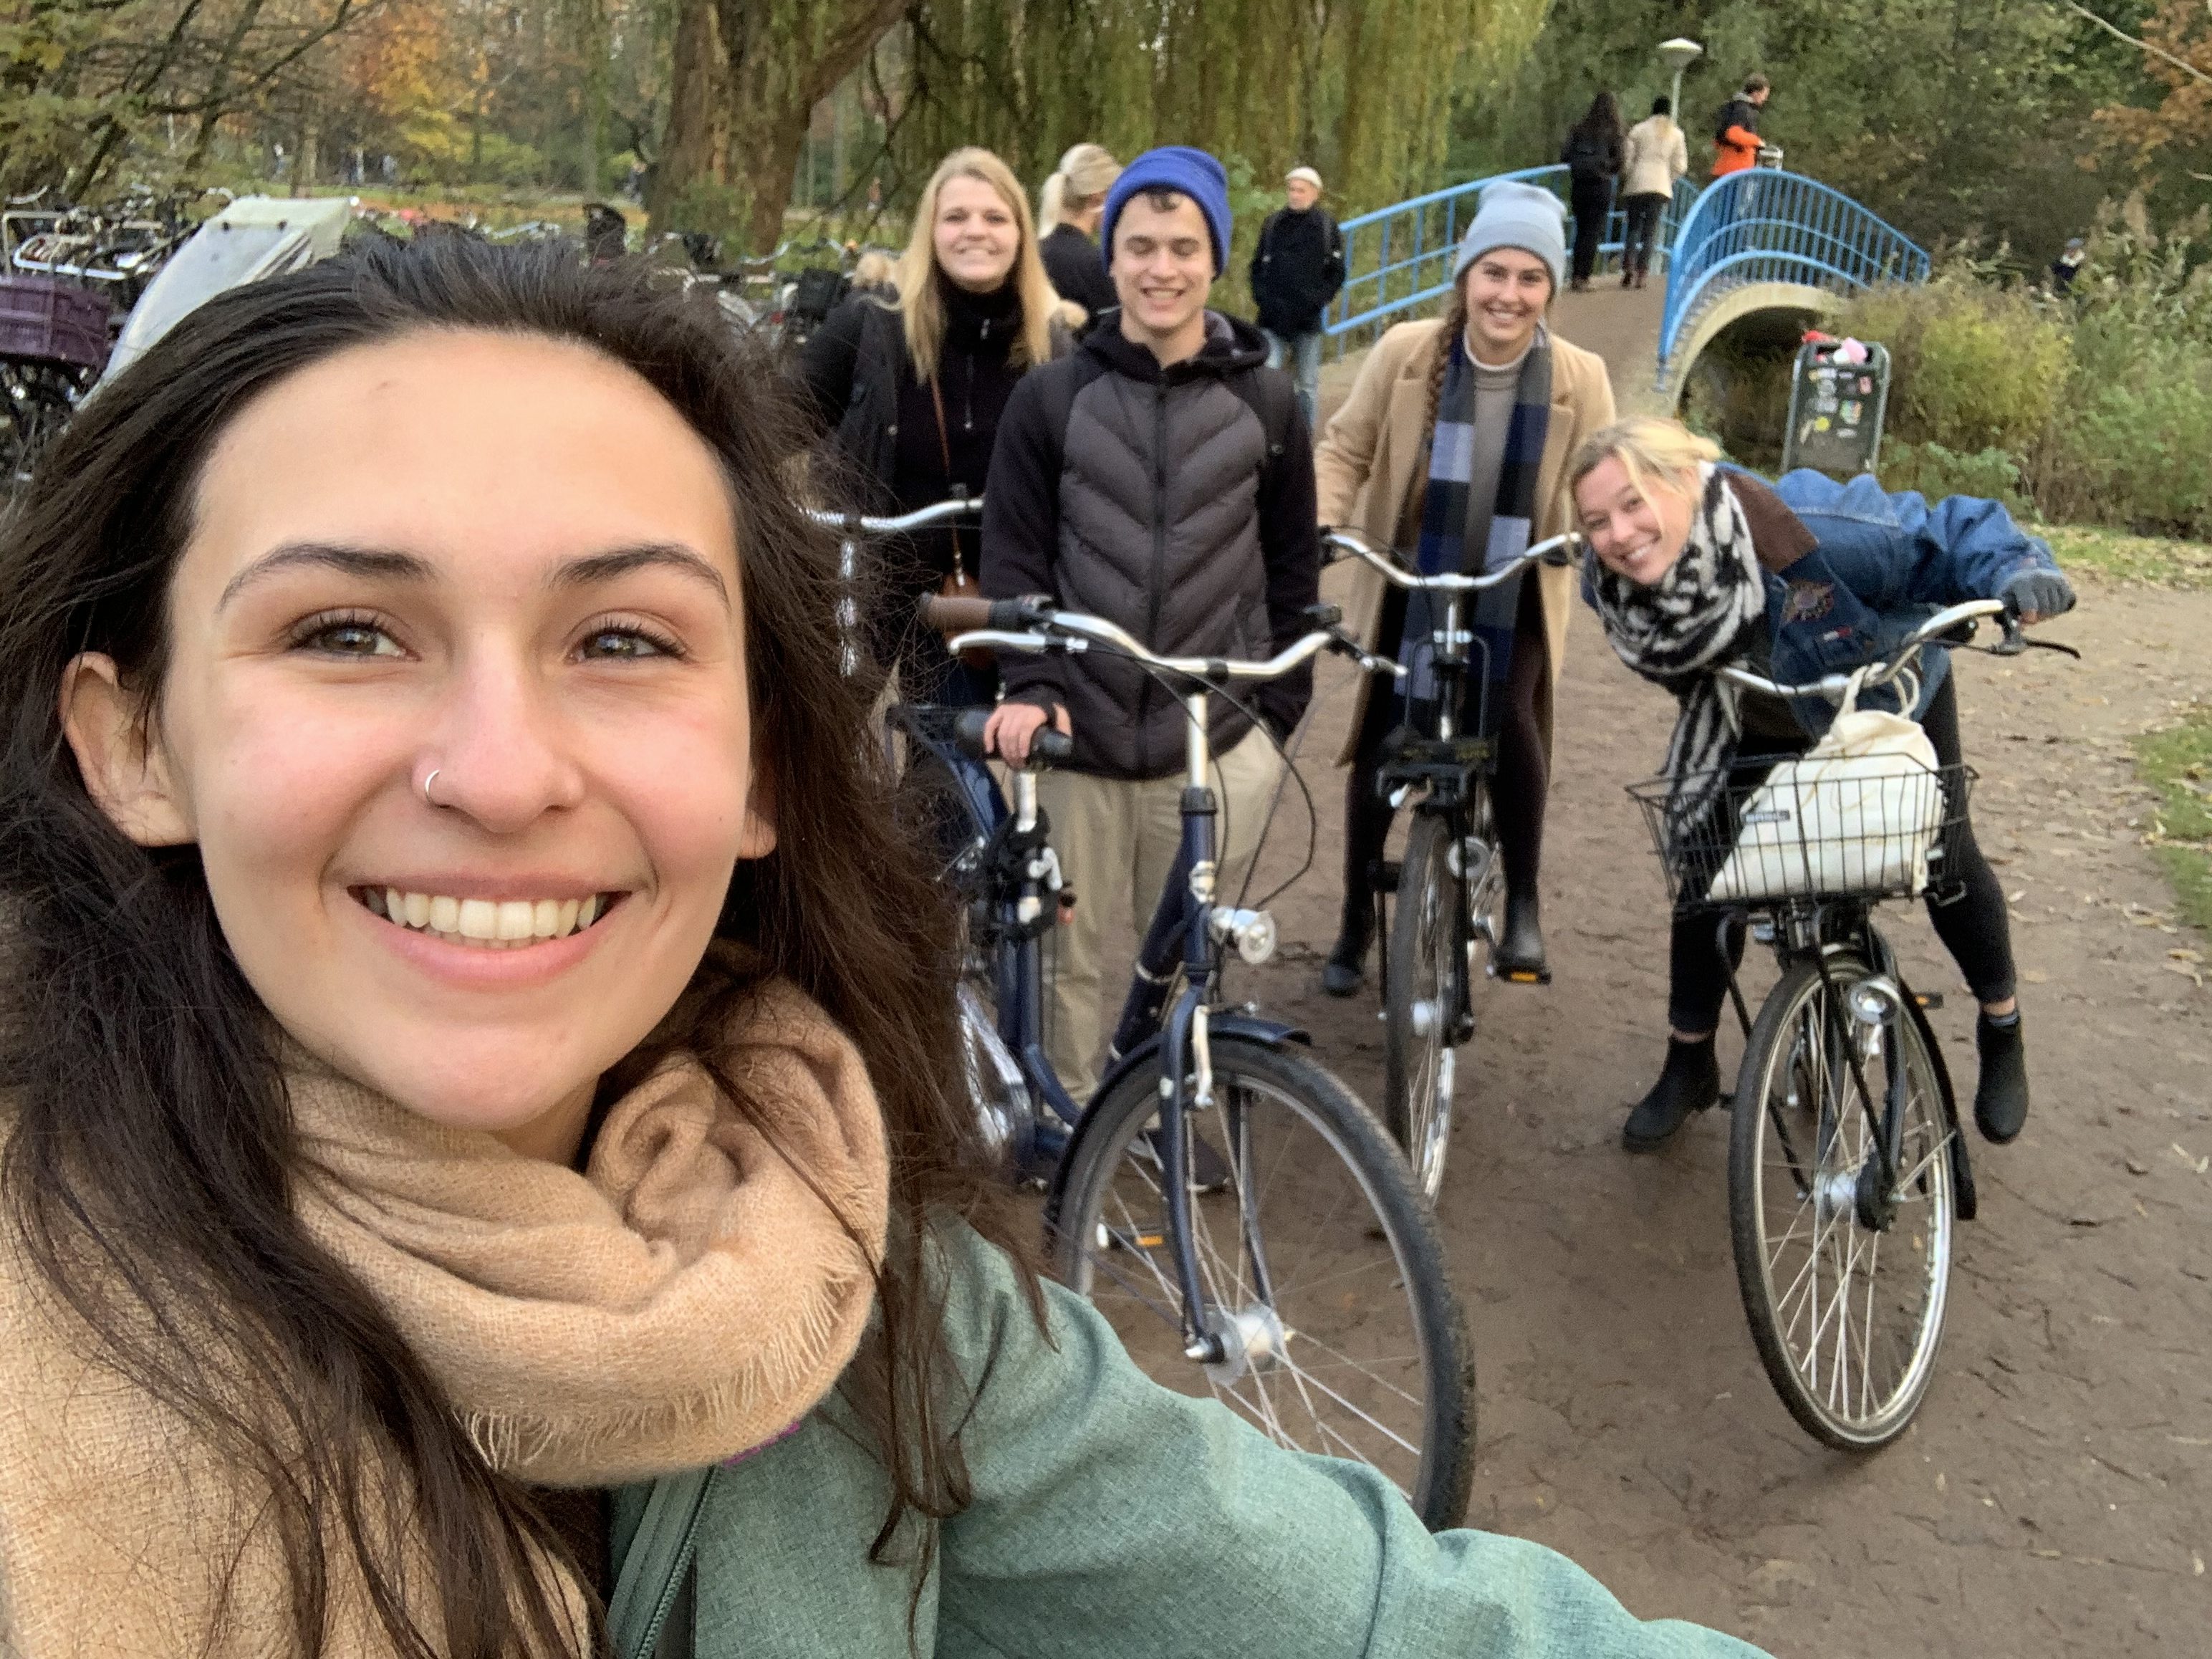 My friends and I on our rented bikes